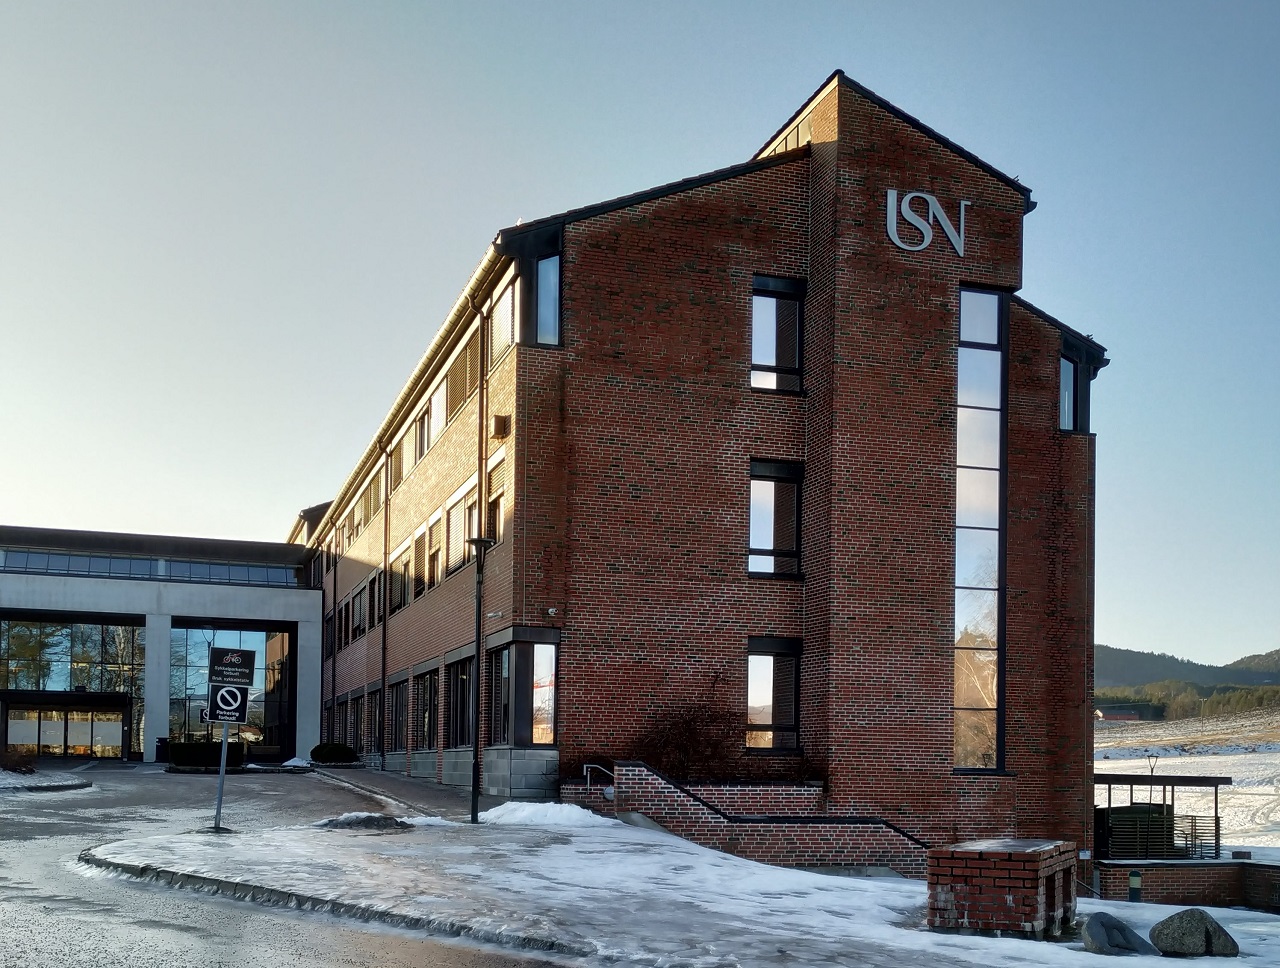 The main entrance to University of South-Eastern Norway at campus Bø. Bø is one of the cheapest cities for international students in Norway.